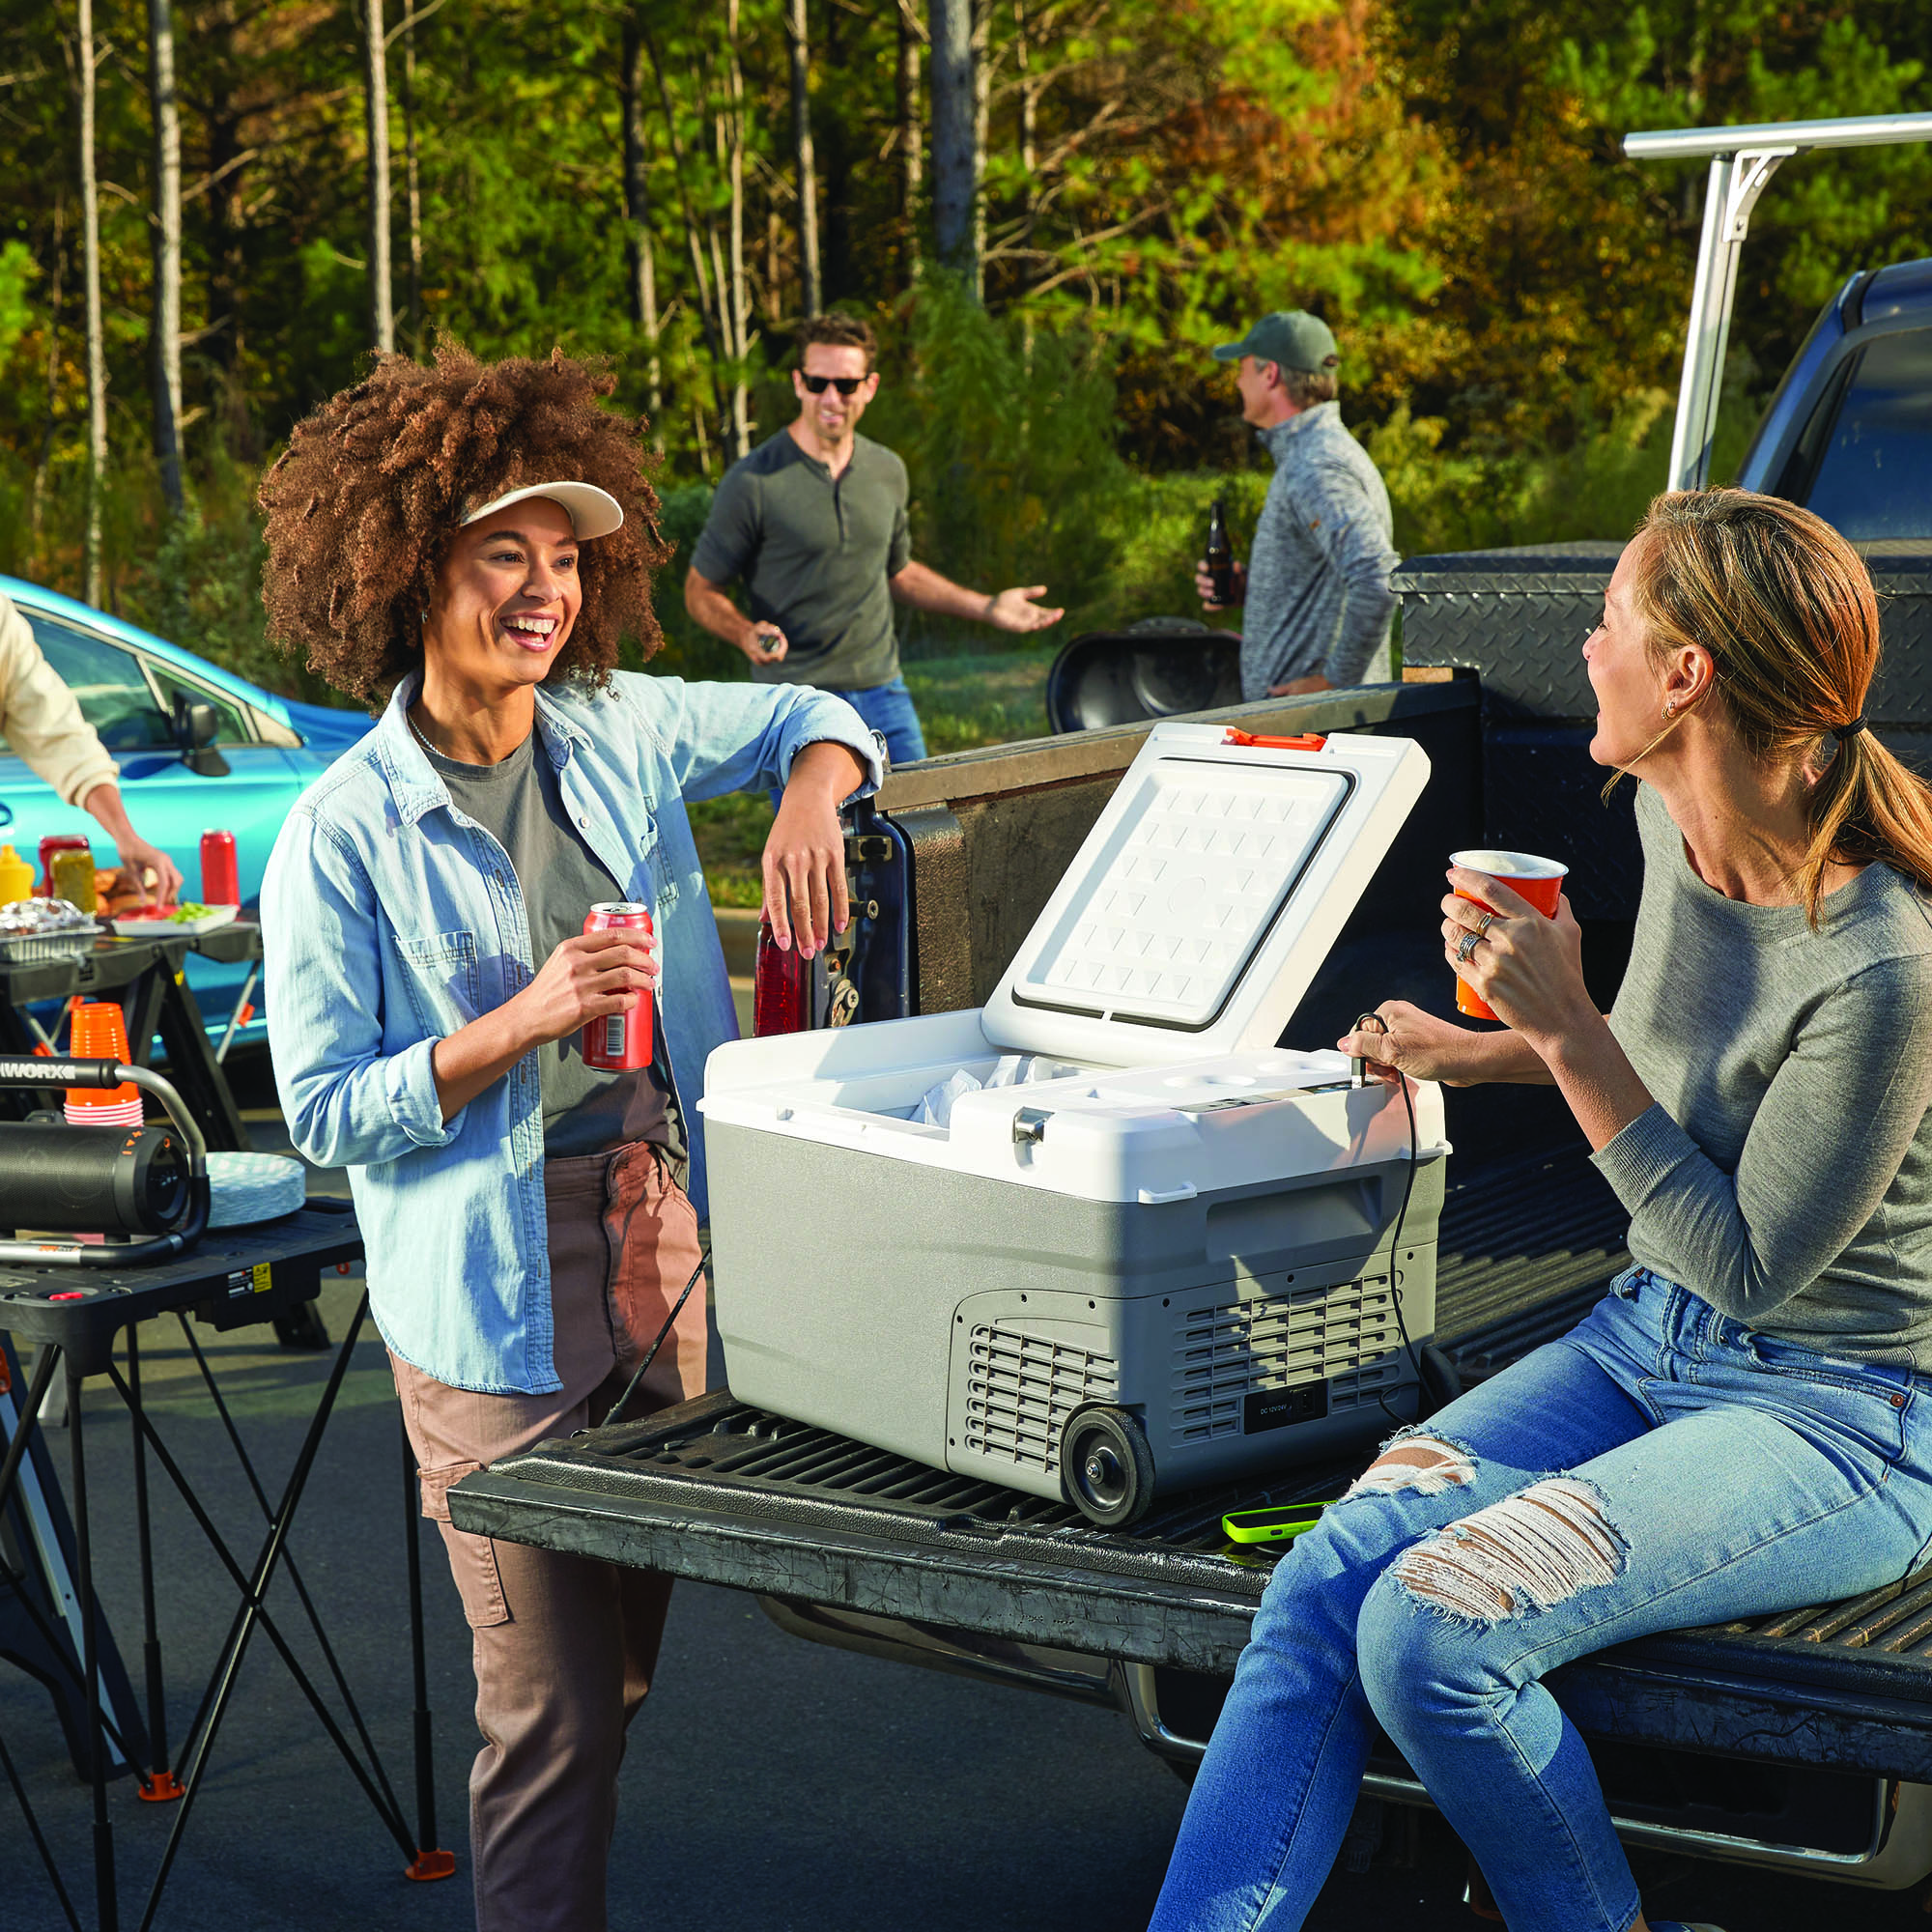 WORX 20V Battery and Electric-Powered Cooler